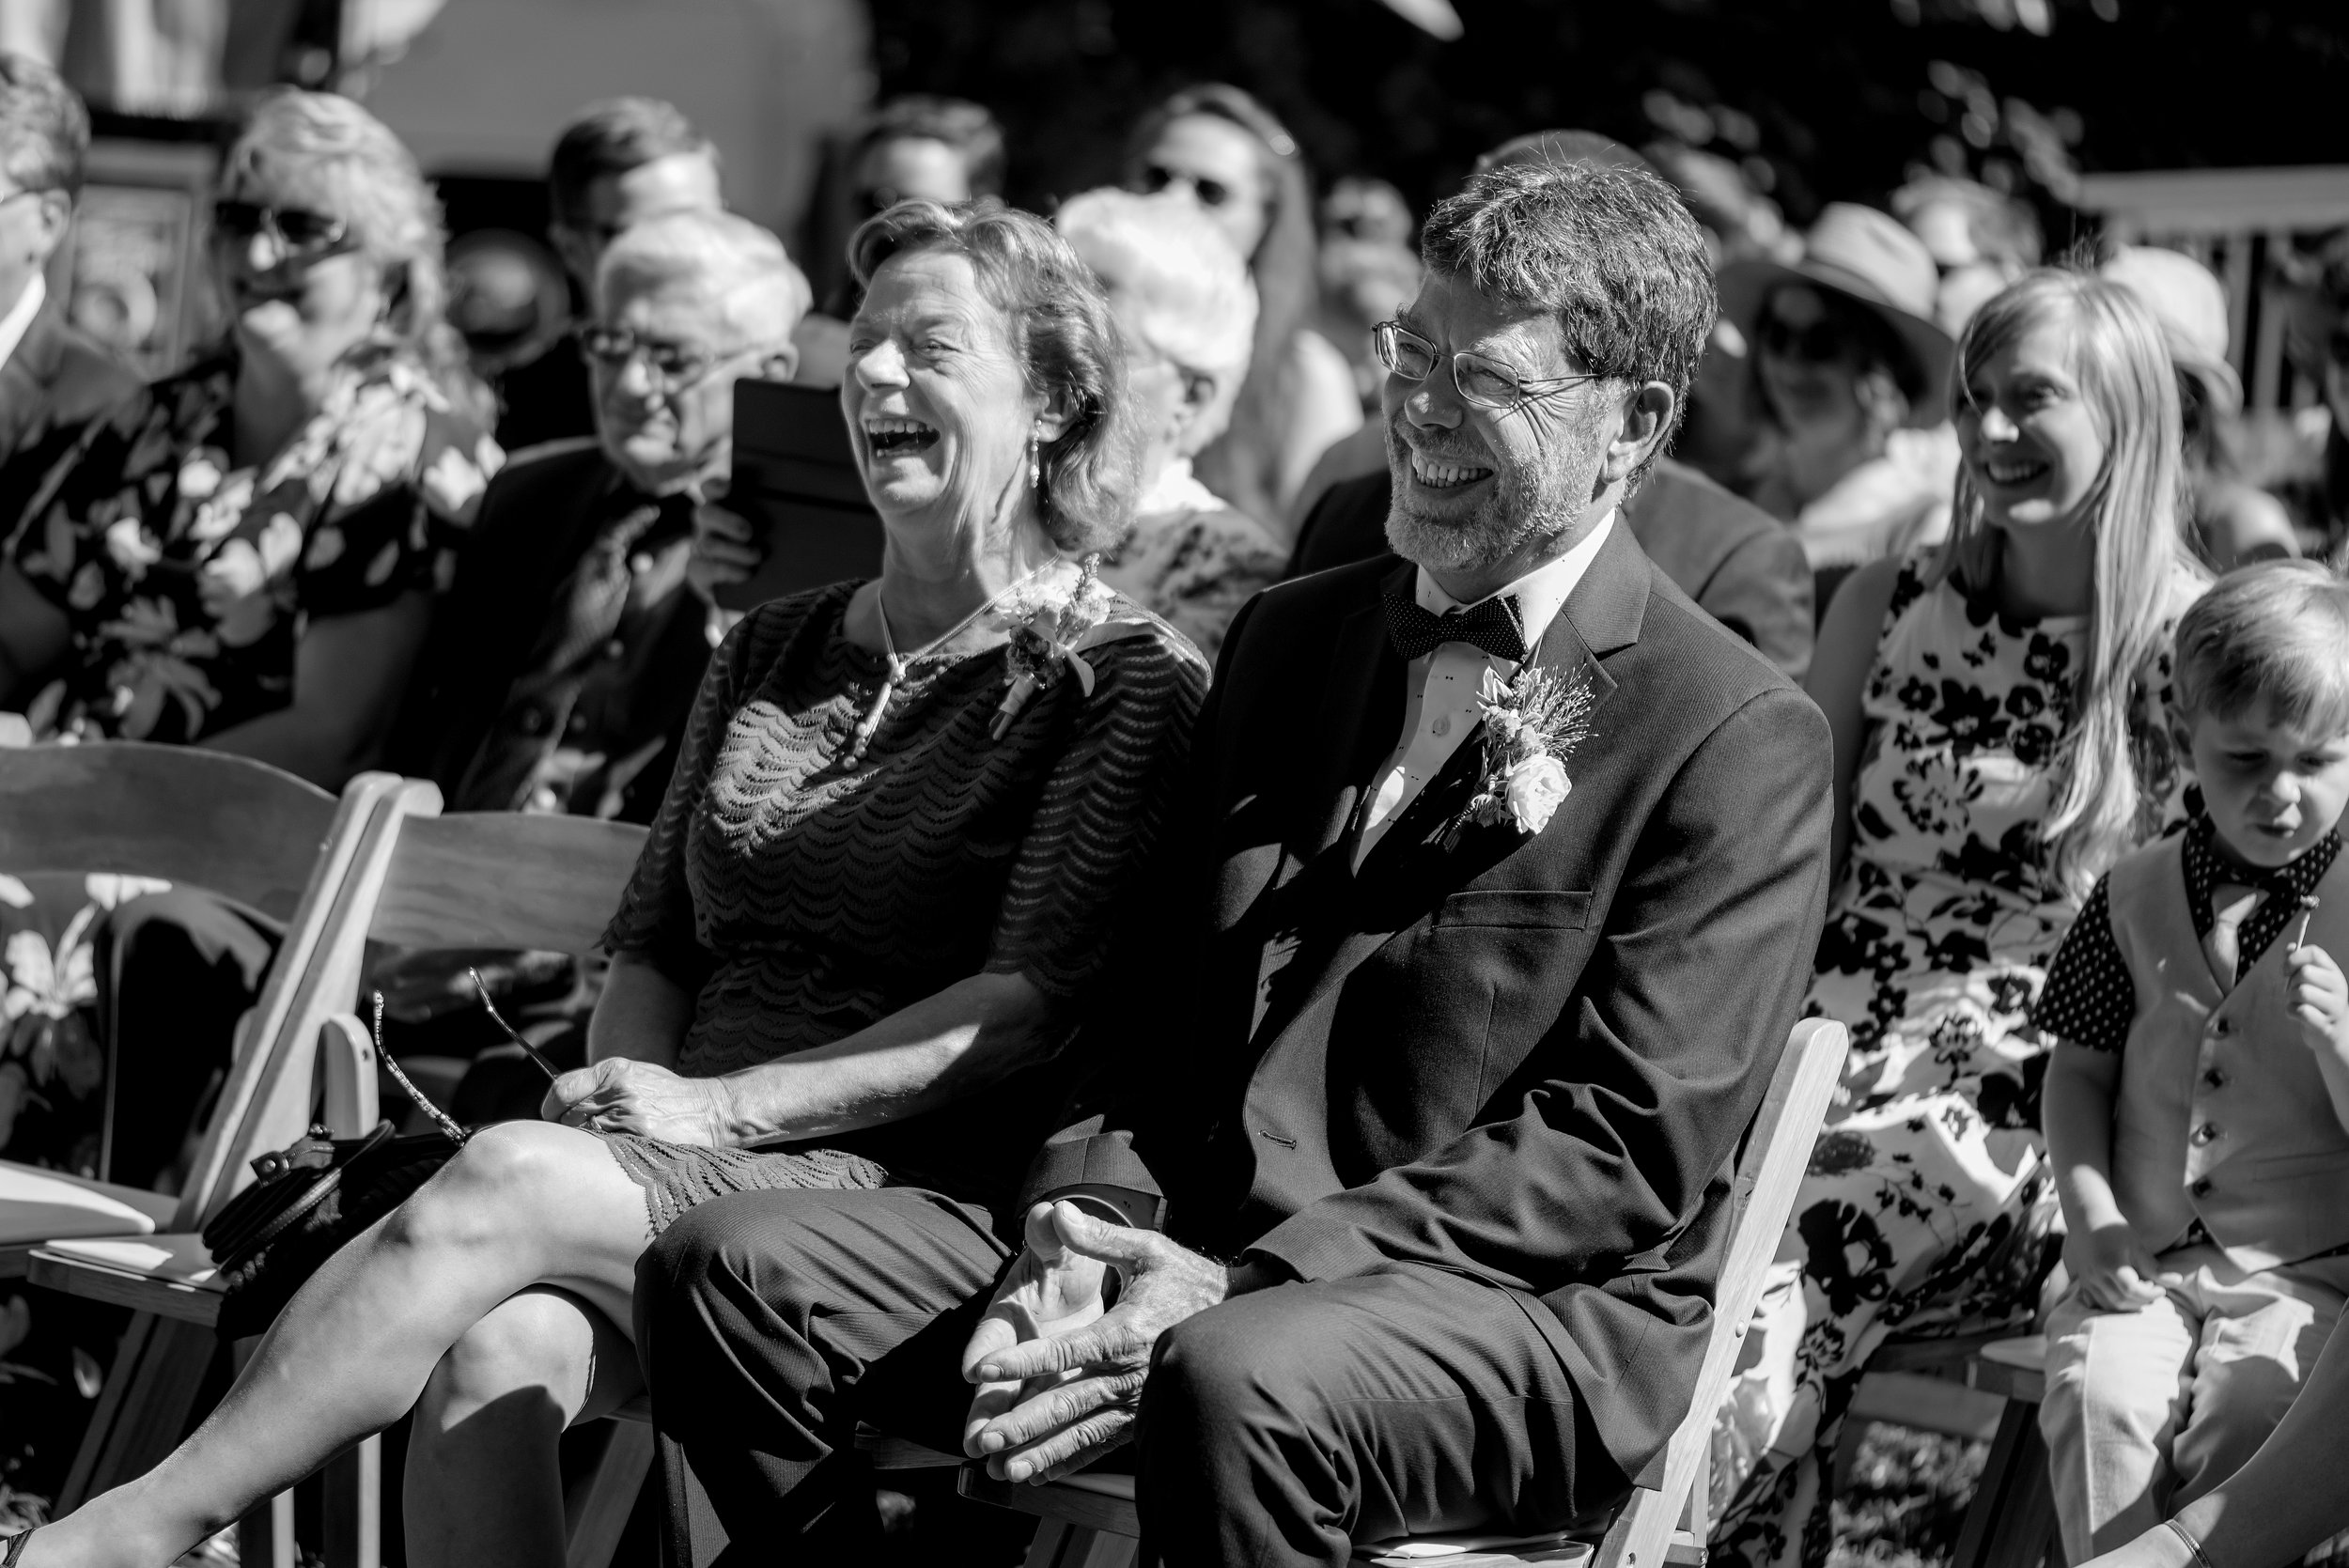  Proud parents observing wedding ceremony at The Mountain Terrace in Woodside California 